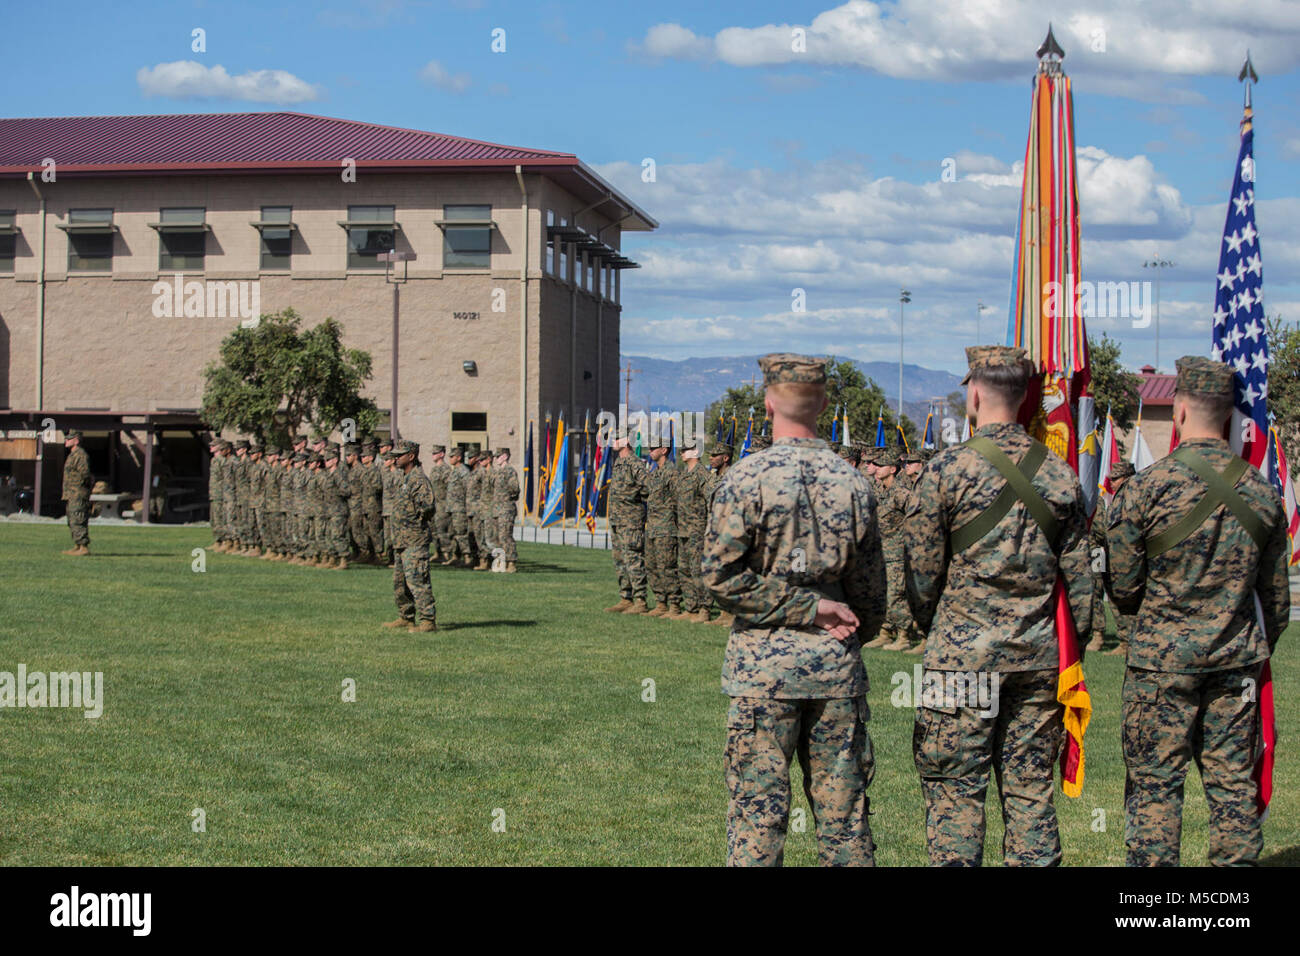 U.S. Marines and Sailors with 1st Marine Logistics Group stand in formation before the appointment ceremony for Master Chief Petty Officer Zachary Pryor, who will become the command master chief for the 1st MLG, at Camp Pendleton, Calif., Feb. 13, 2018. Pryor was appointed as the command master chief for all medical and dental personnel within the 1st MLG. (U.S. Marine Corps Stock Photo